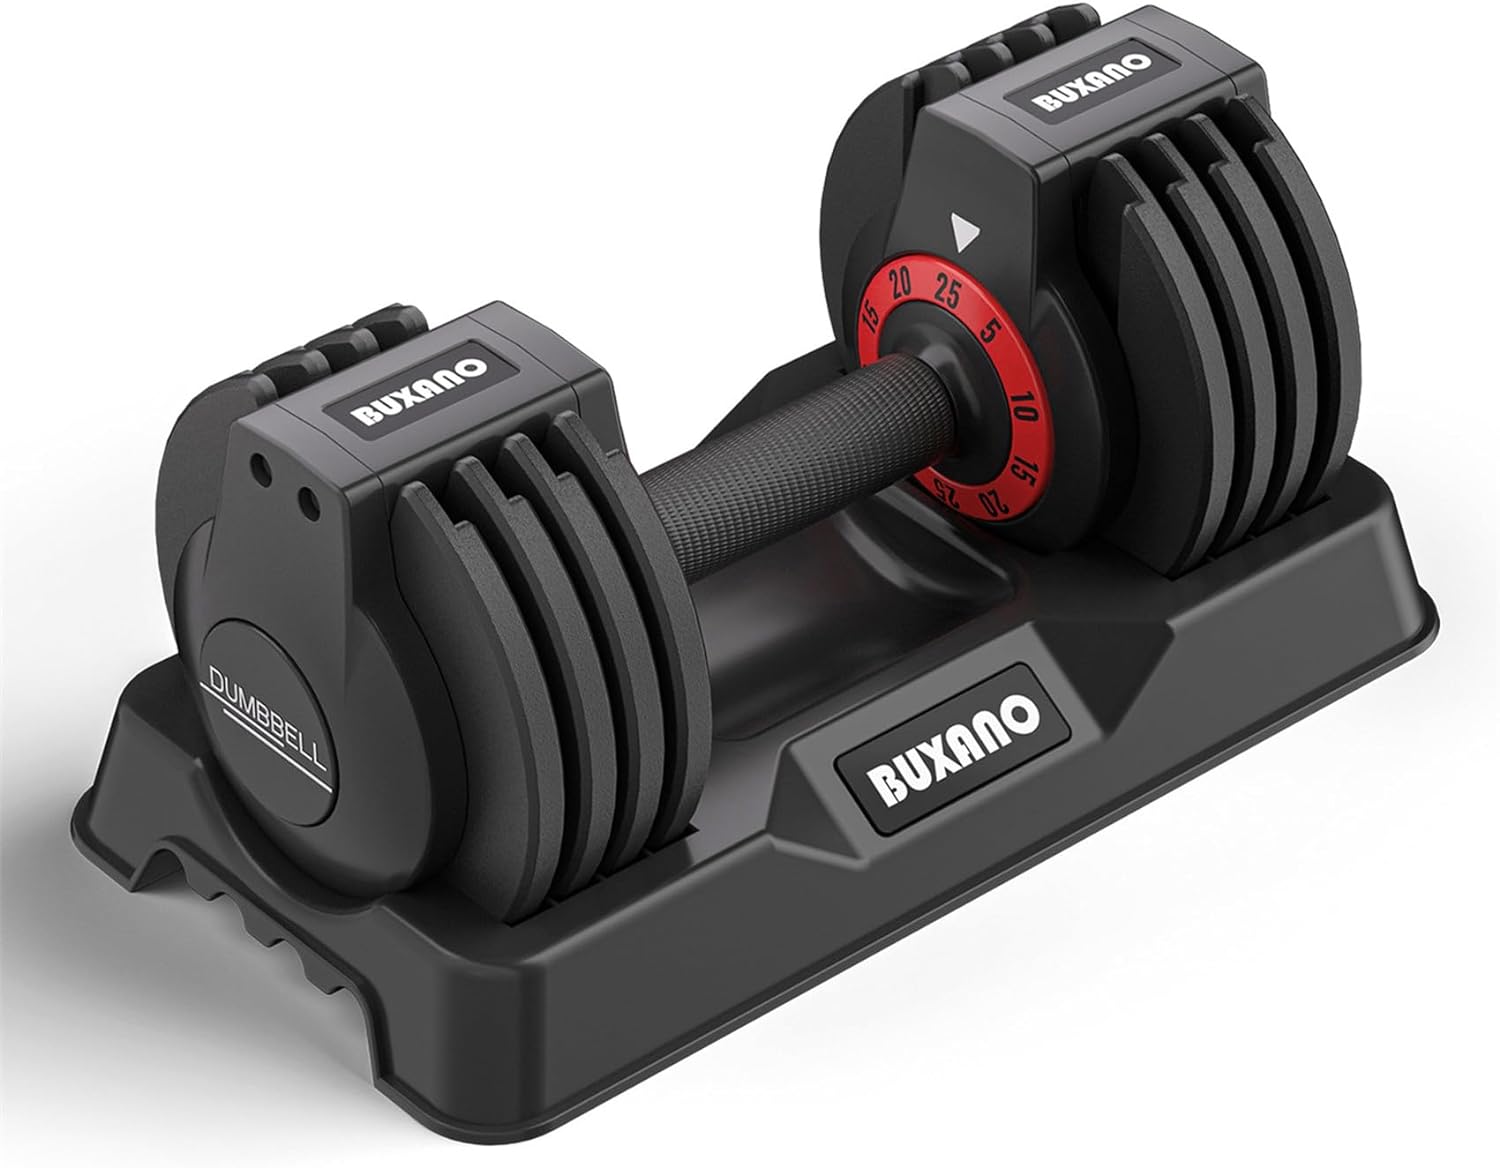 Adjustable Dumbbell 25LB Single Dumbbell Weight, 5 in 1 Free Weight Dumbbell with Anti-Slip Metal Handle, Suitable for Home Gym Exercise Equipment